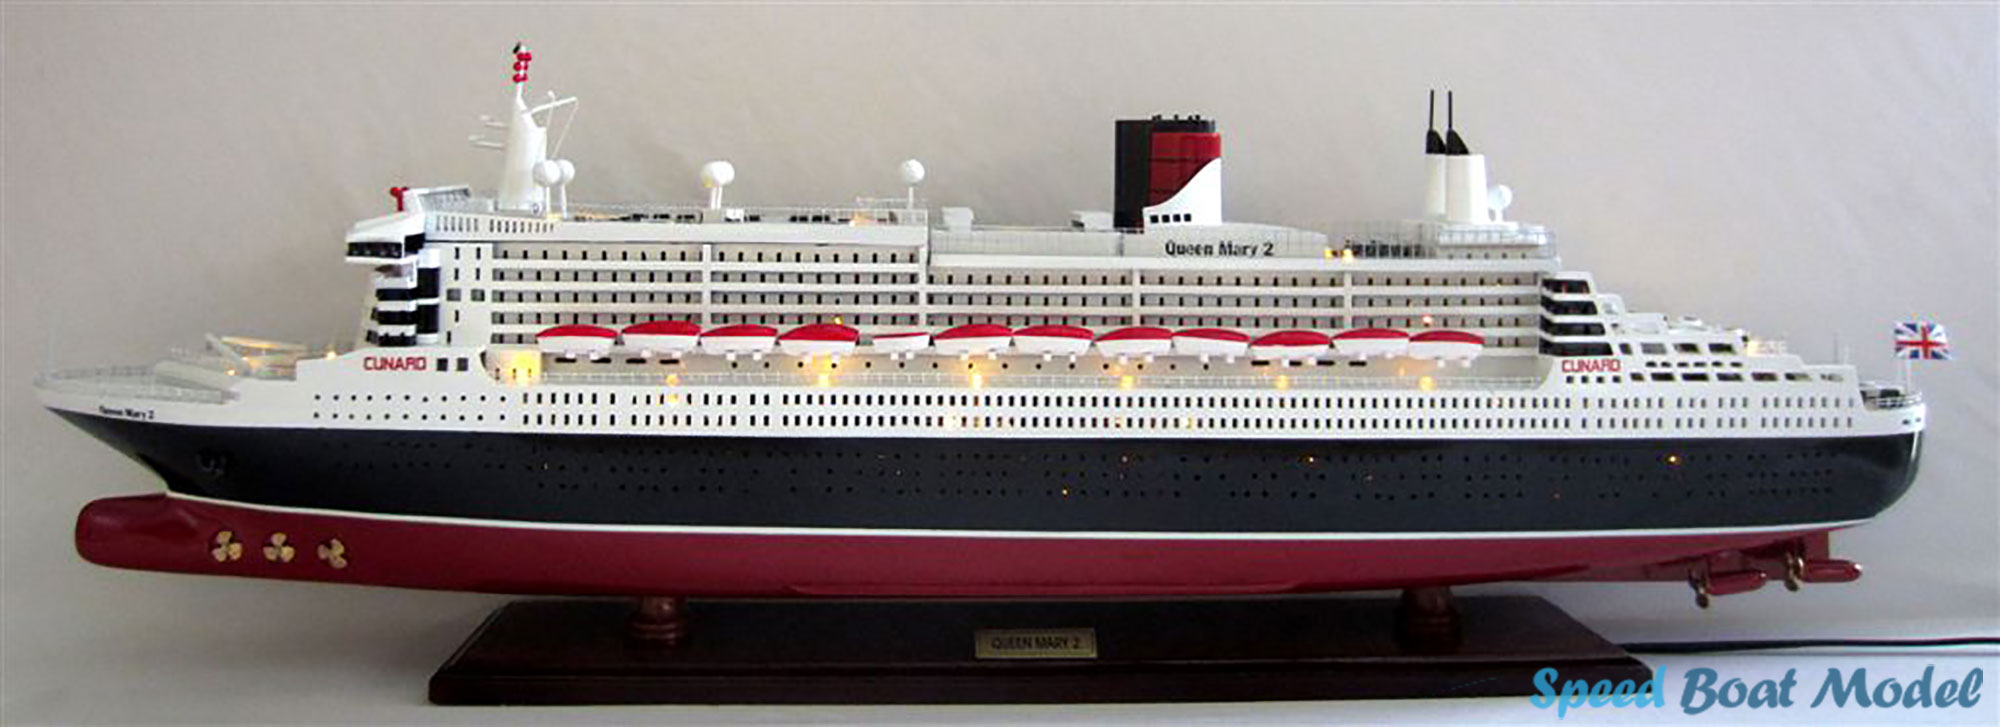 Queen Mary 2 Cruise Ship Model With Lights 39.3